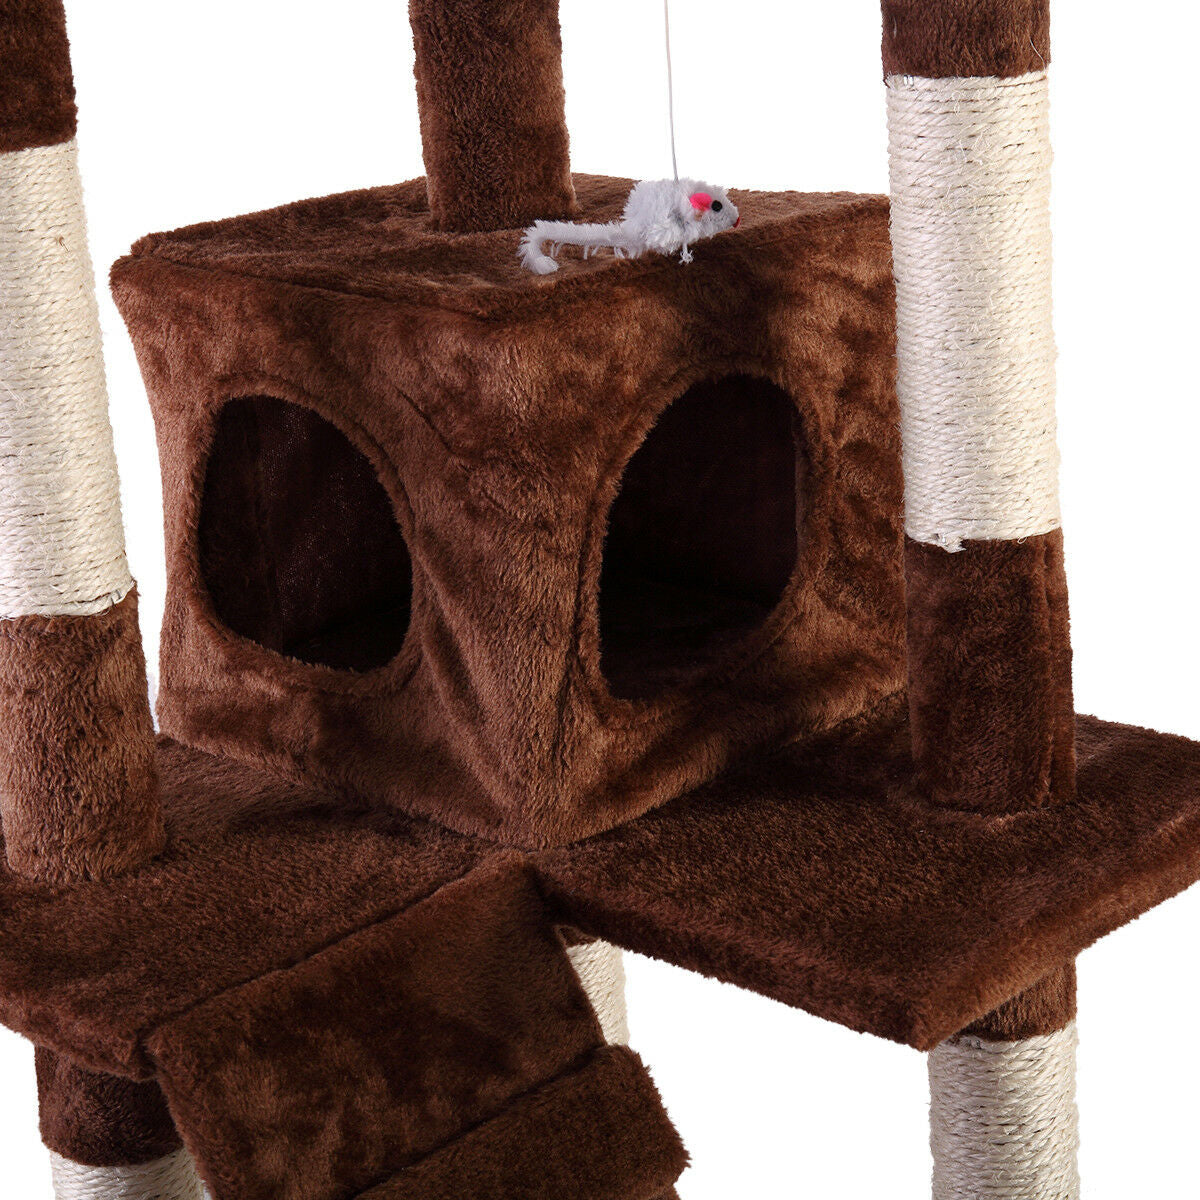 Topcobe 67" Large Cat Tree with Sisal-Covered Scratching Post Condo, Big Multi-Level Cats Tower Furniture - for Kittens Pets Climb Scratch House Play Brown